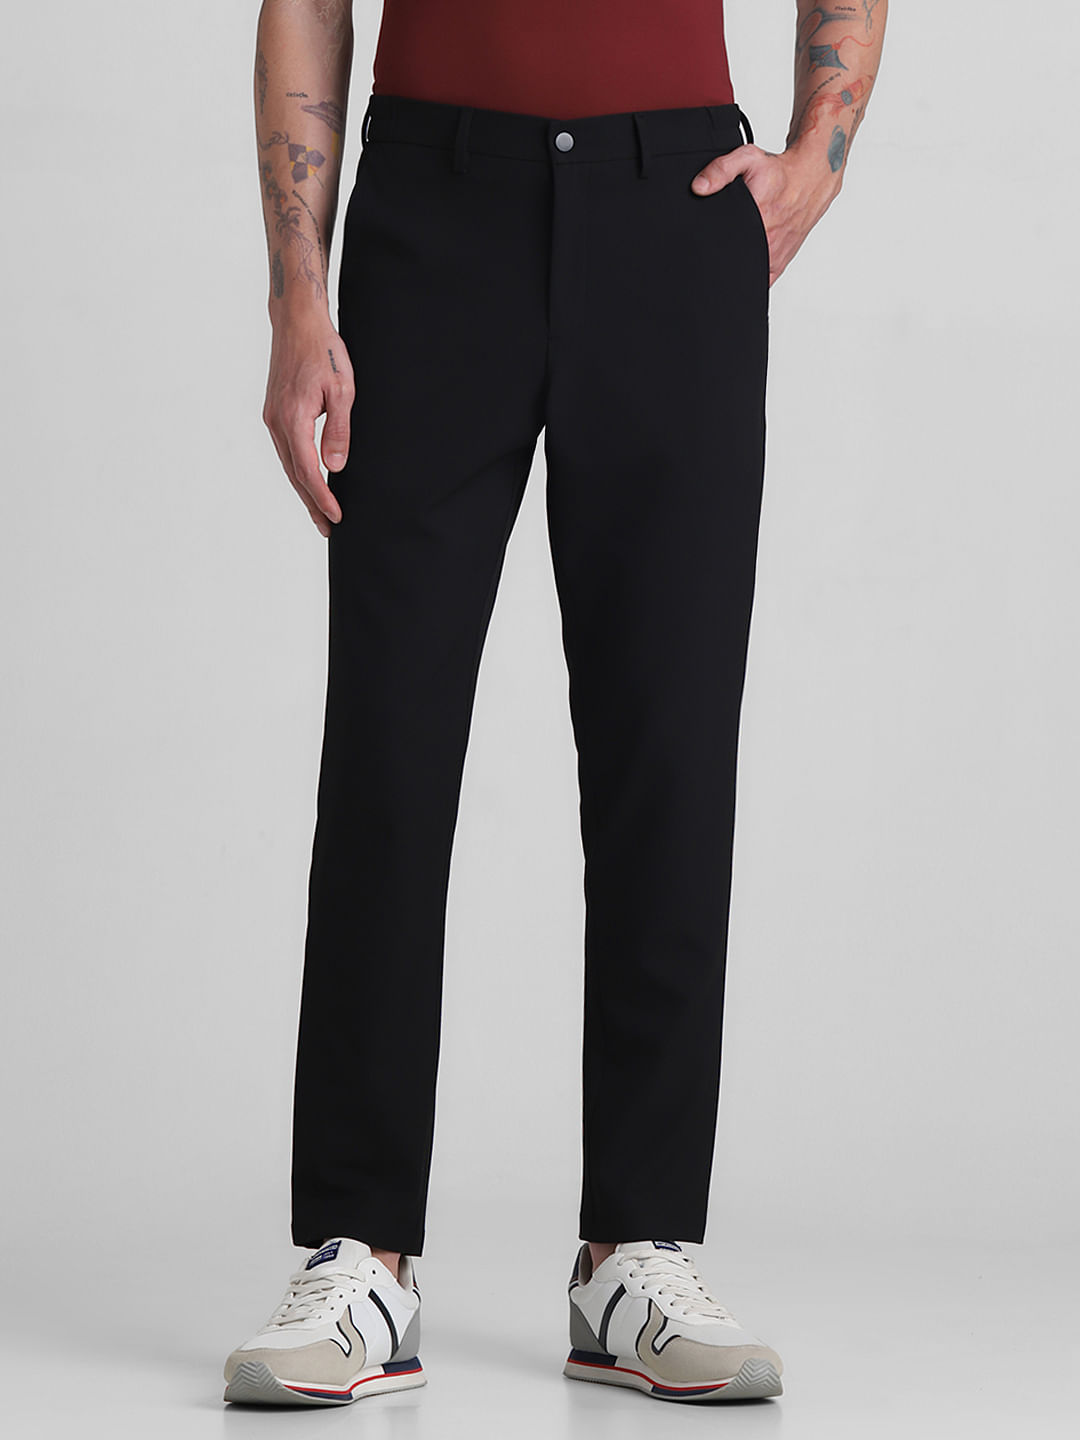 SASSAFRAS Women Black Mid-Rise Slim Fit Trousers Price in India, Full  Specifications & Offers | DTashion.com